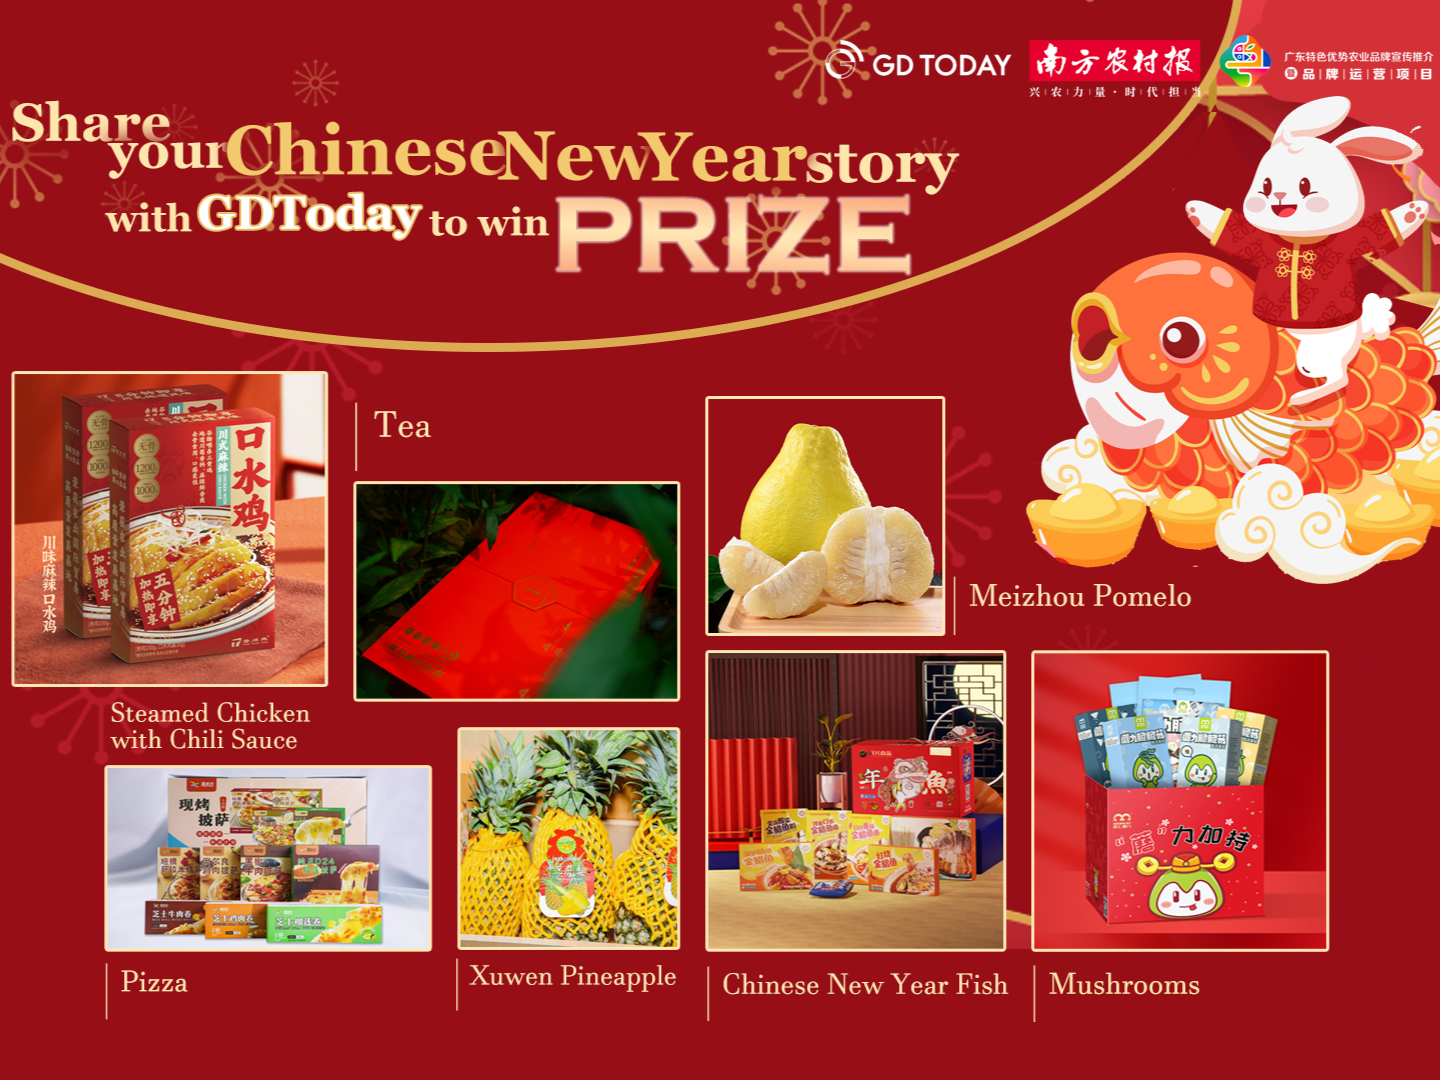 Prizes! Share your Chinese New Year story in Guangdong“粵味中國年”視覺作品有獎征集活動啟動！